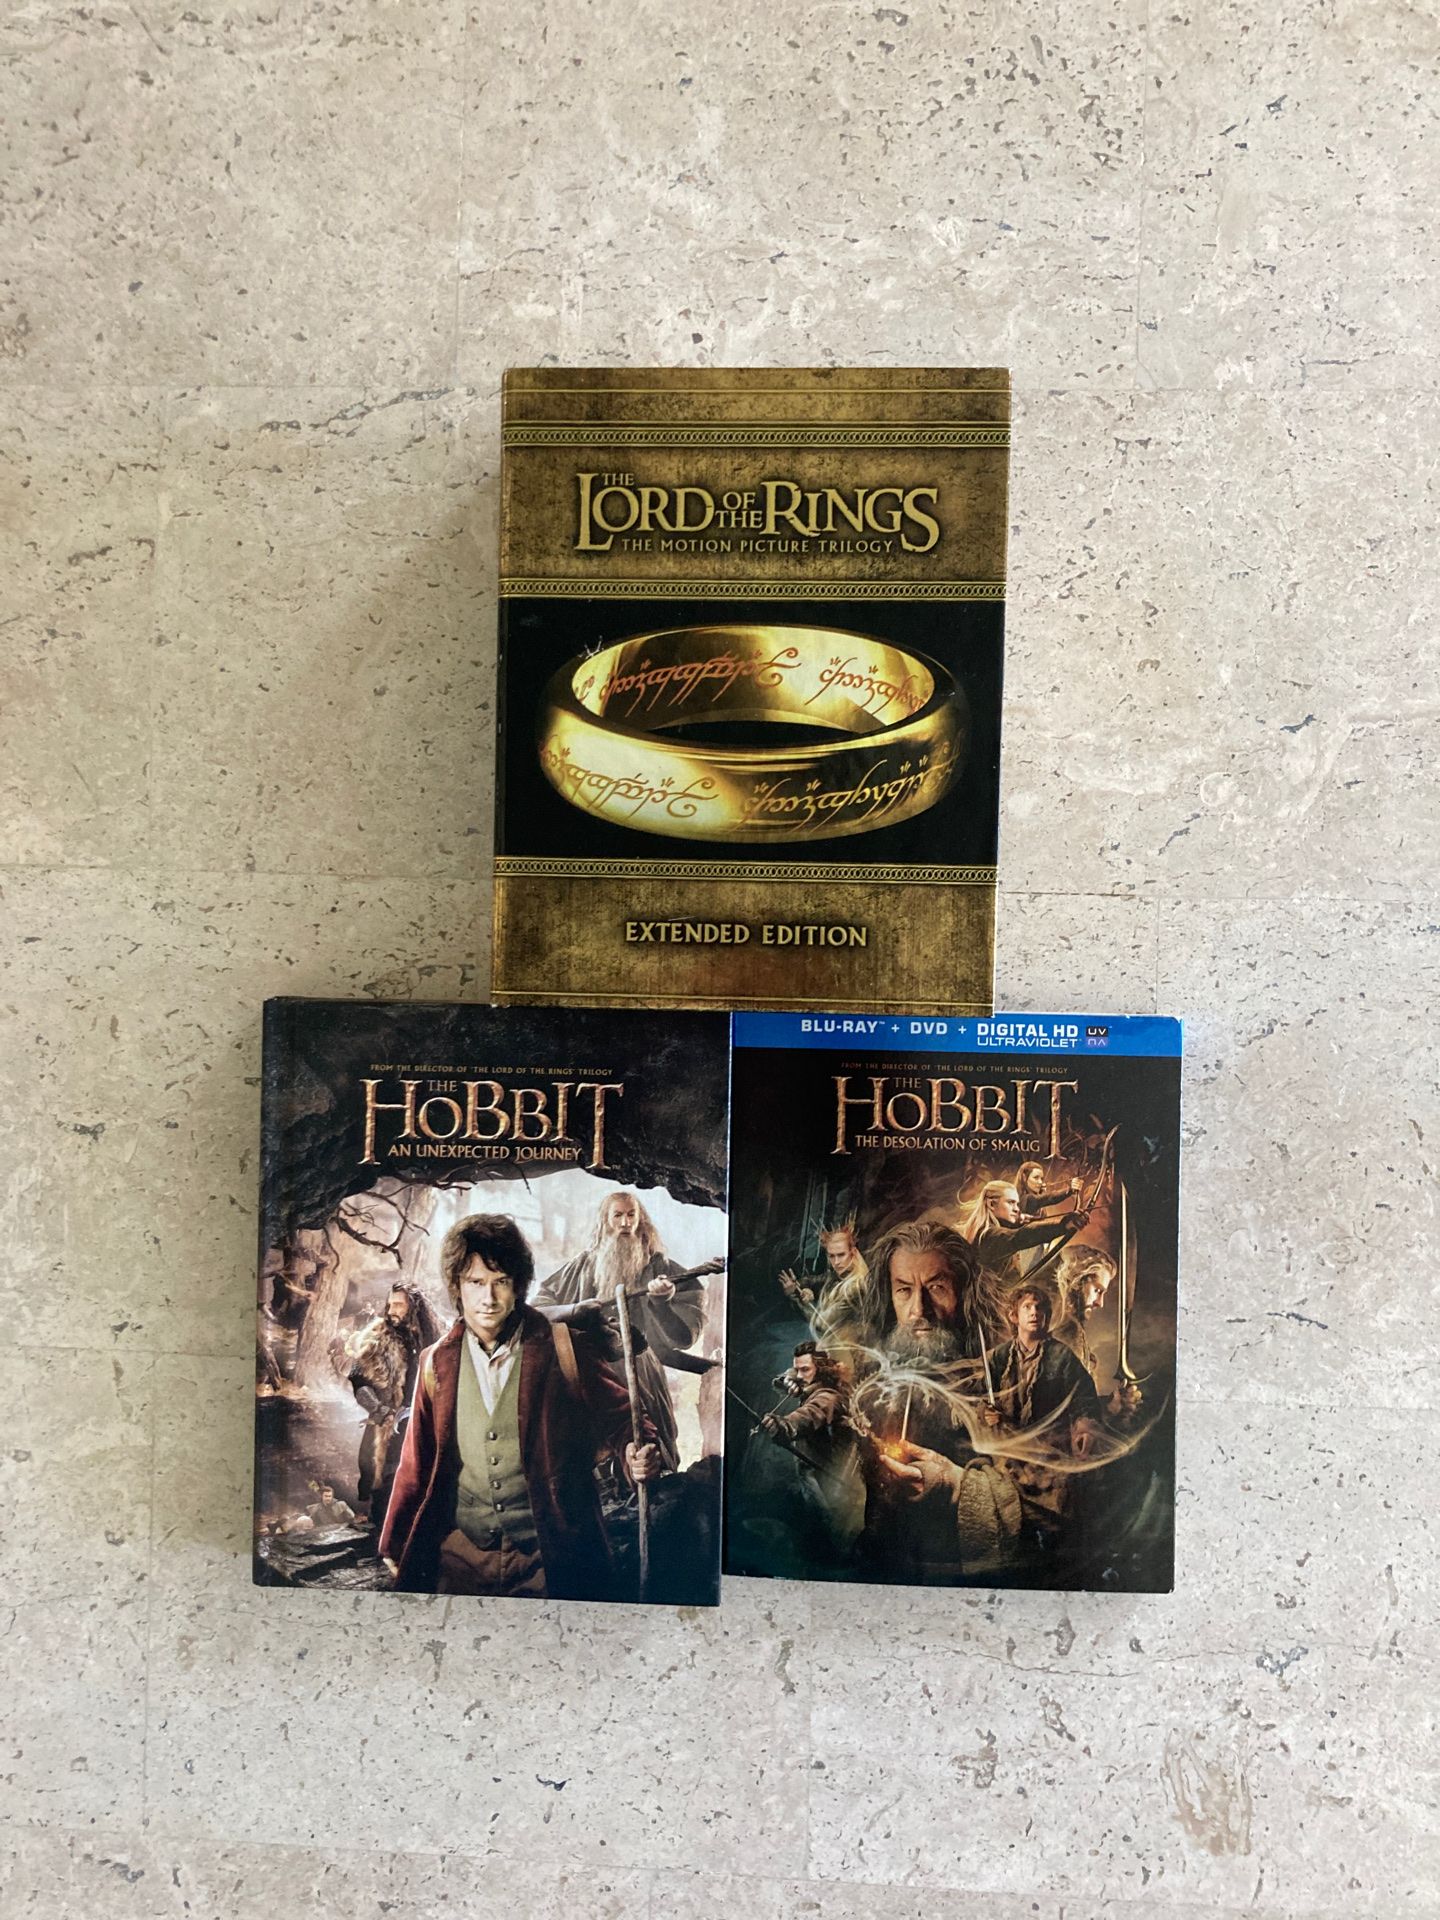 Lord of the Rings Trilogy “Extended Edition” Collectors Set/Hobbit: An Unexpected Journey and The Hobbit: The Desolation of Smaug